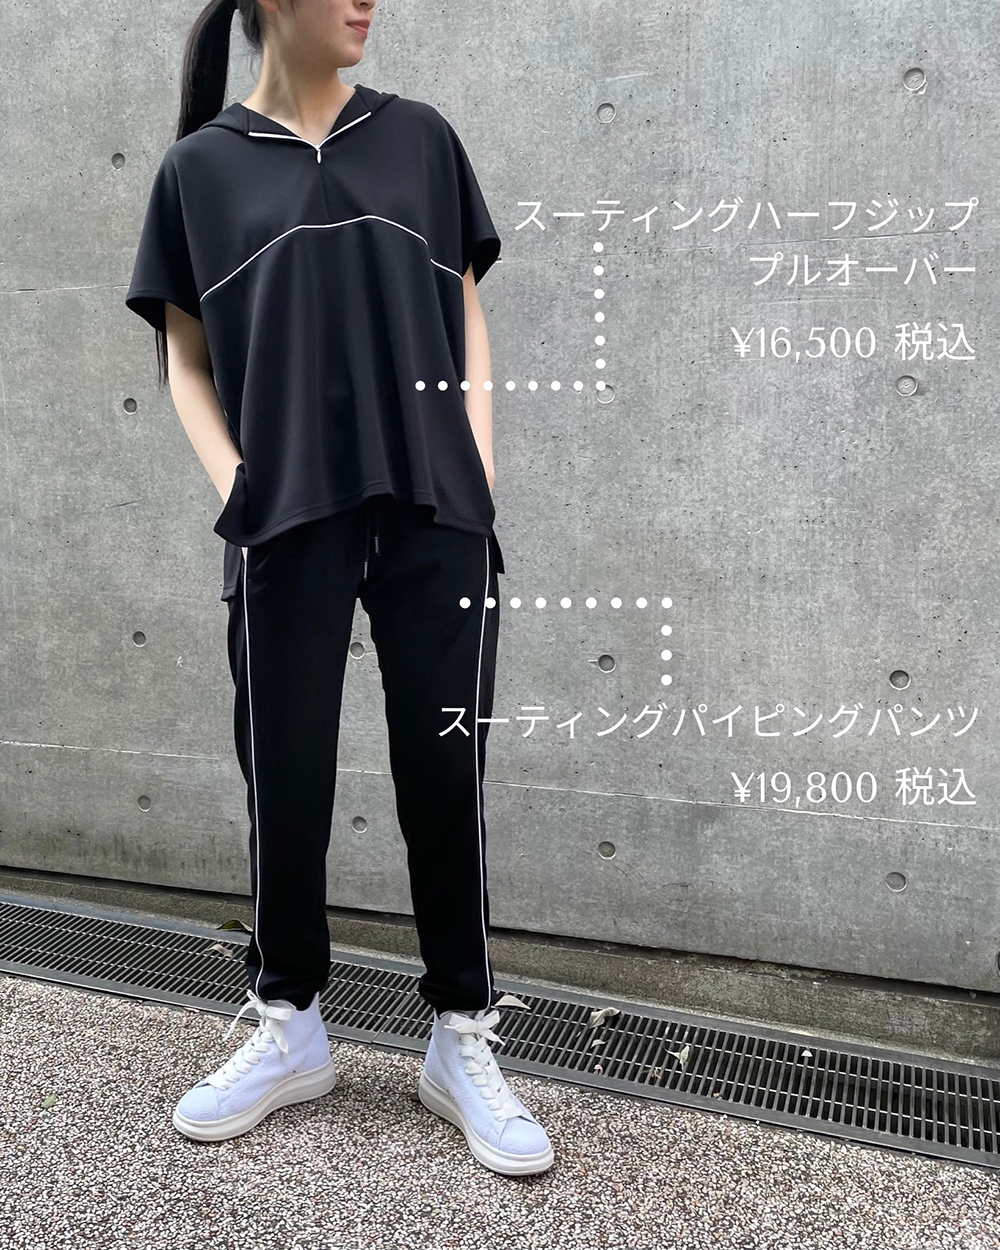 ESSENTIAL ACTIVE STYLE | Night STORE | ダブルスタンダードクロージング公式通販